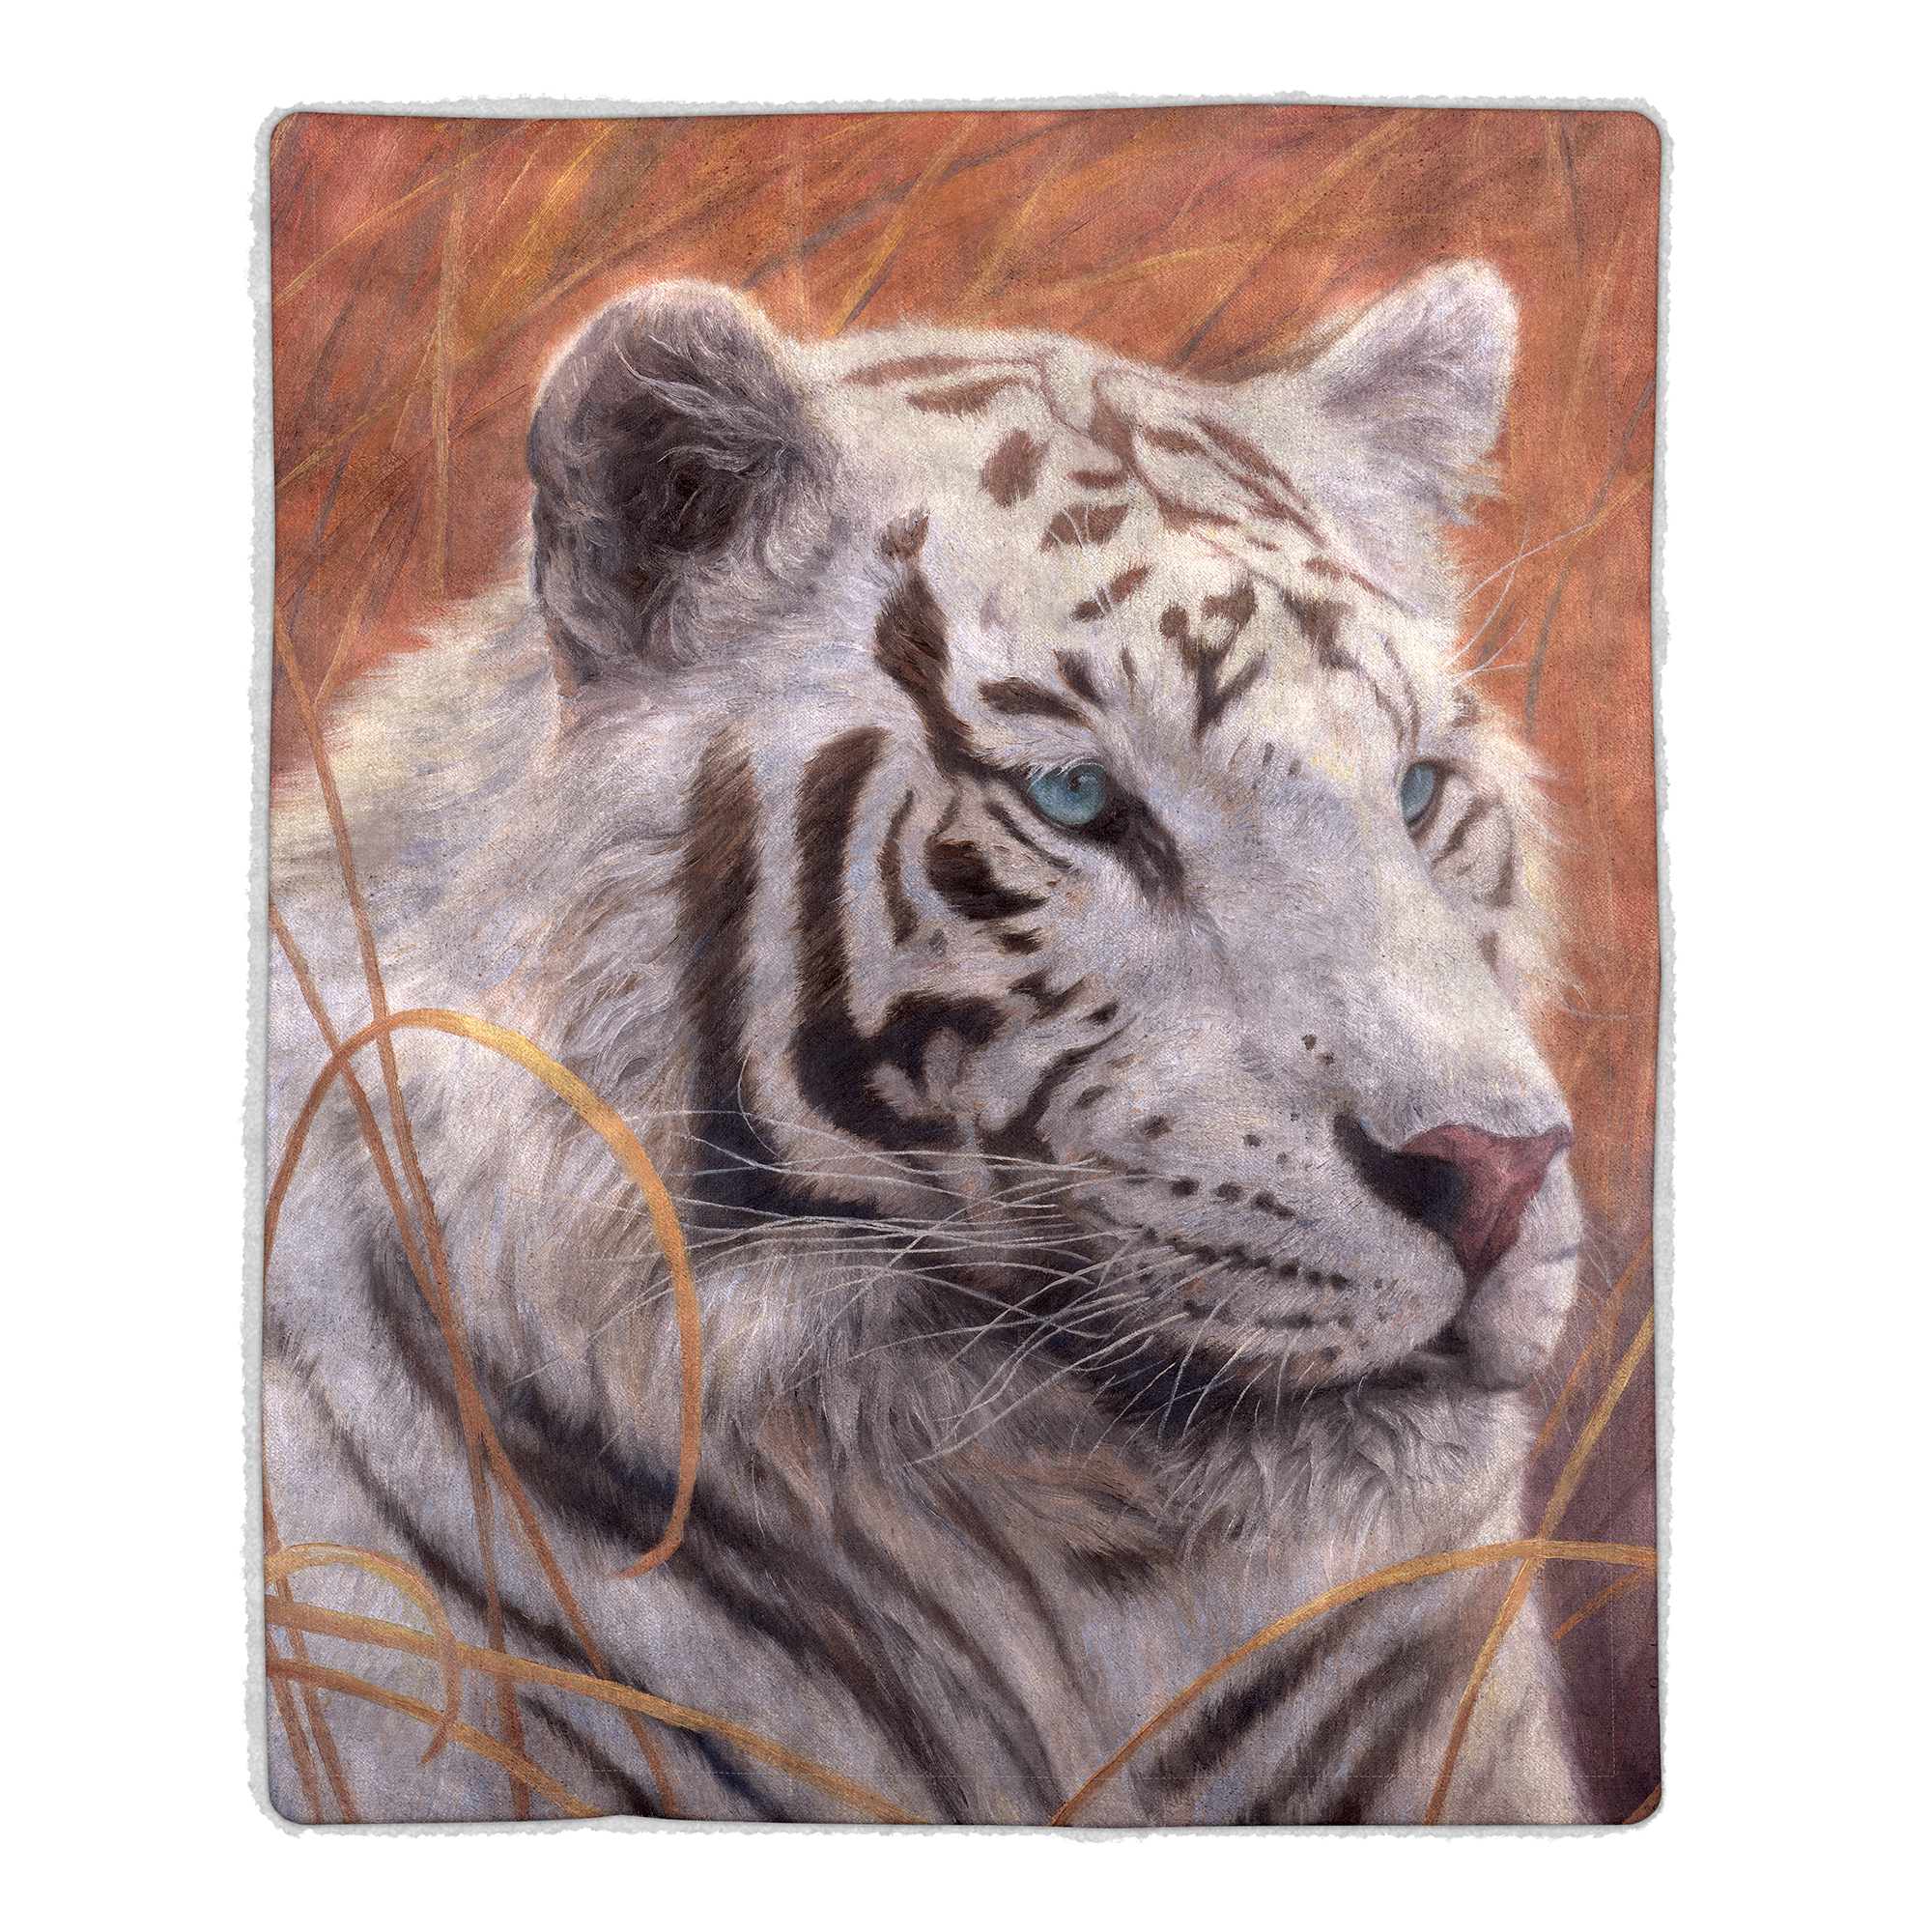 Fluffy Plush Throw Blanket 50 X 60 Inch - White Tiger Print Lightweight Hypoallergenic Bed Or Couch Soft Plush